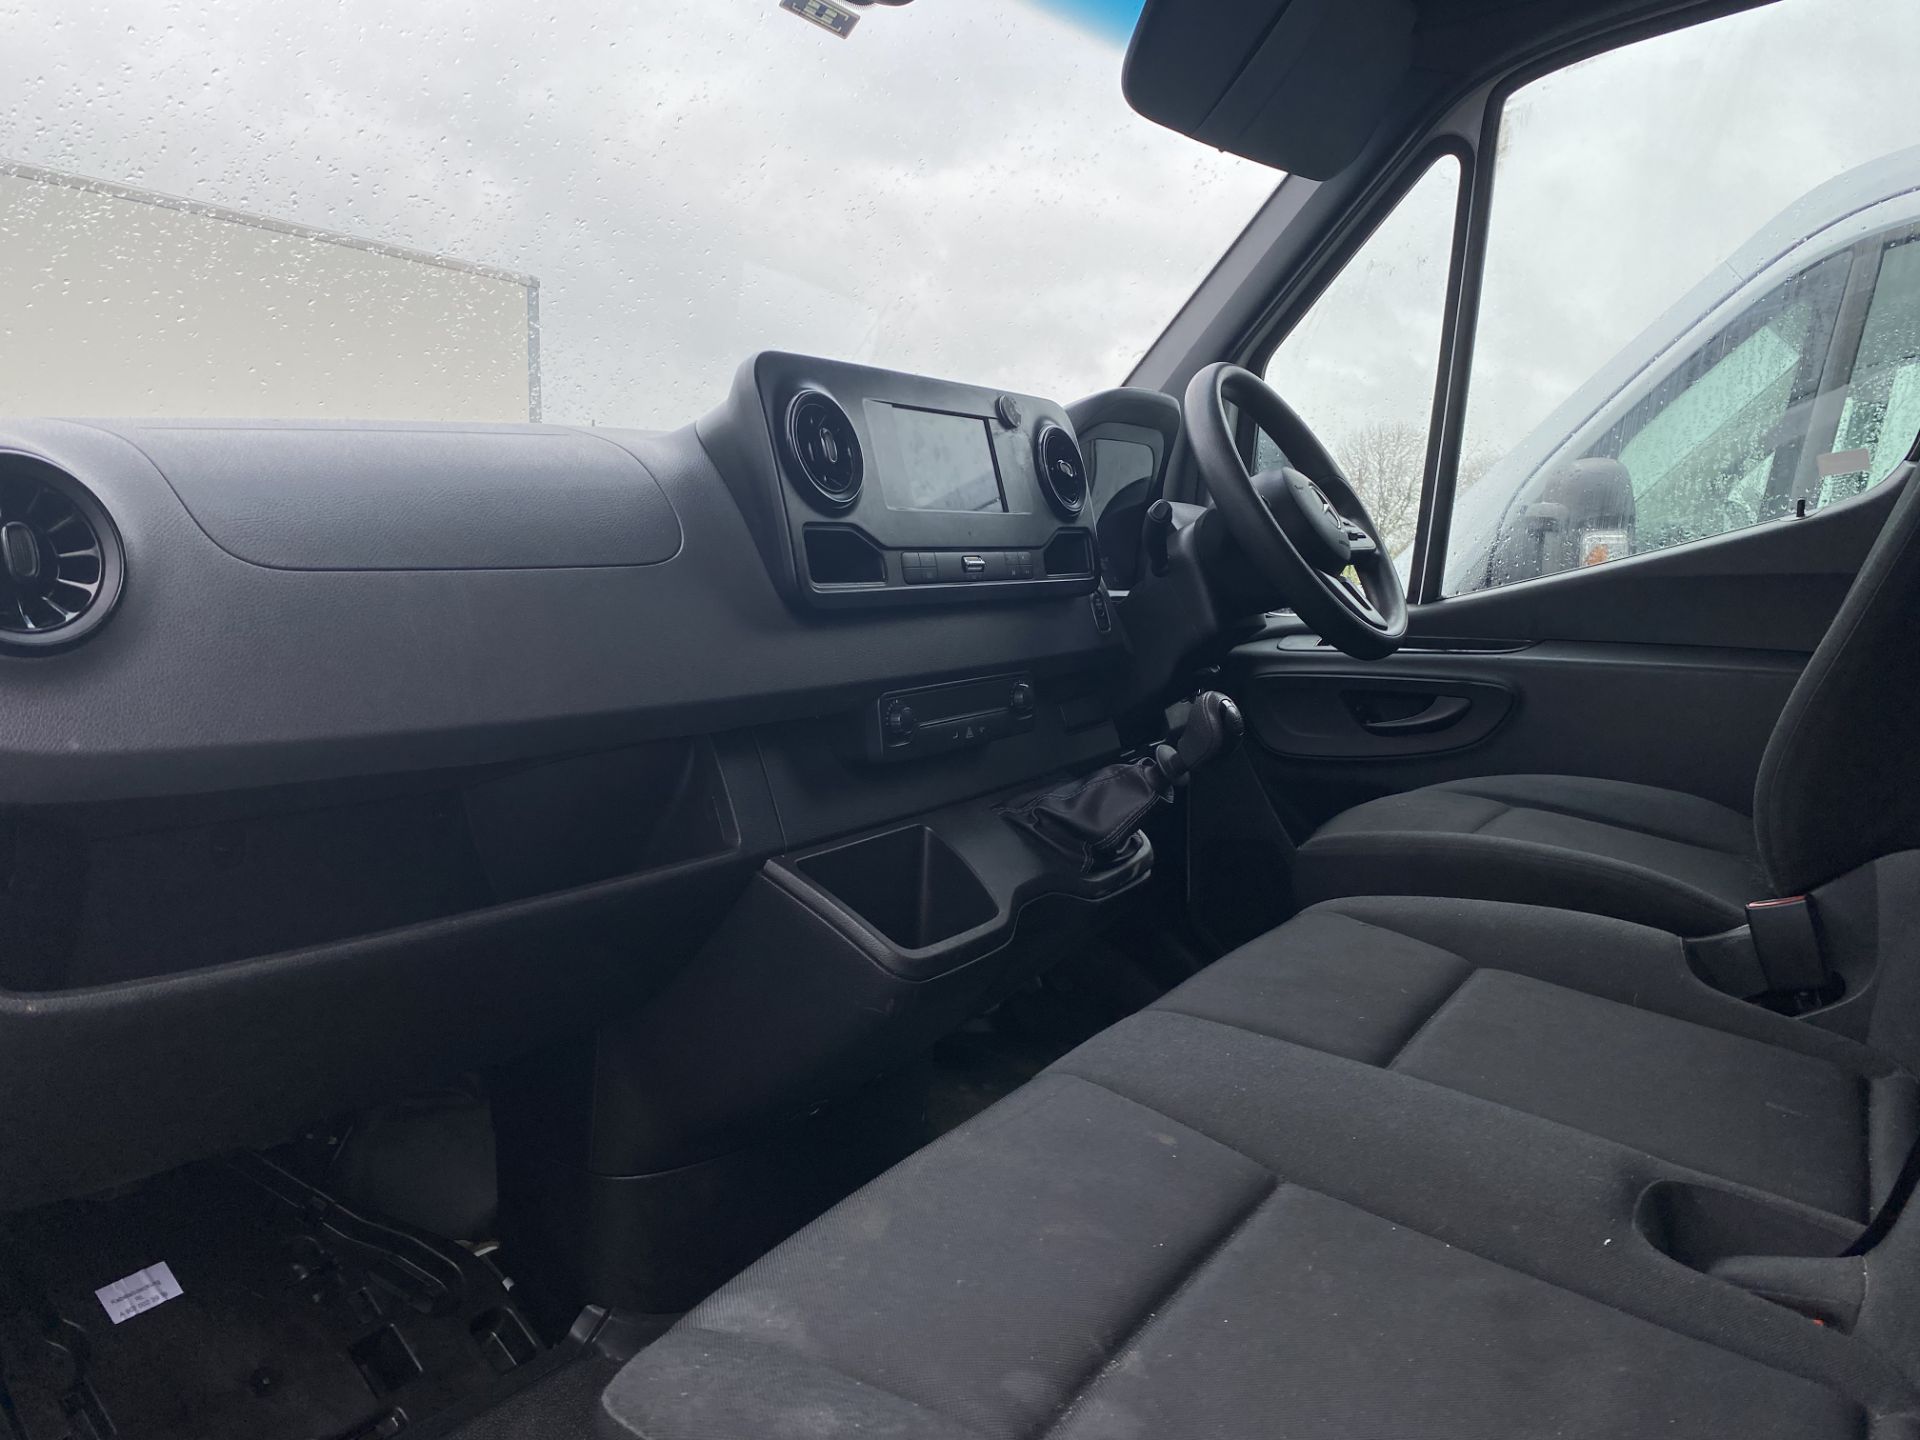 MERCEDES SPRINTER 314CDI 'LWB" HIGH ROOF (140) EURO 6 "2019 MODEL" - NEW SHAPE - 1 OWNER - LOOK!!! - Image 11 of 11